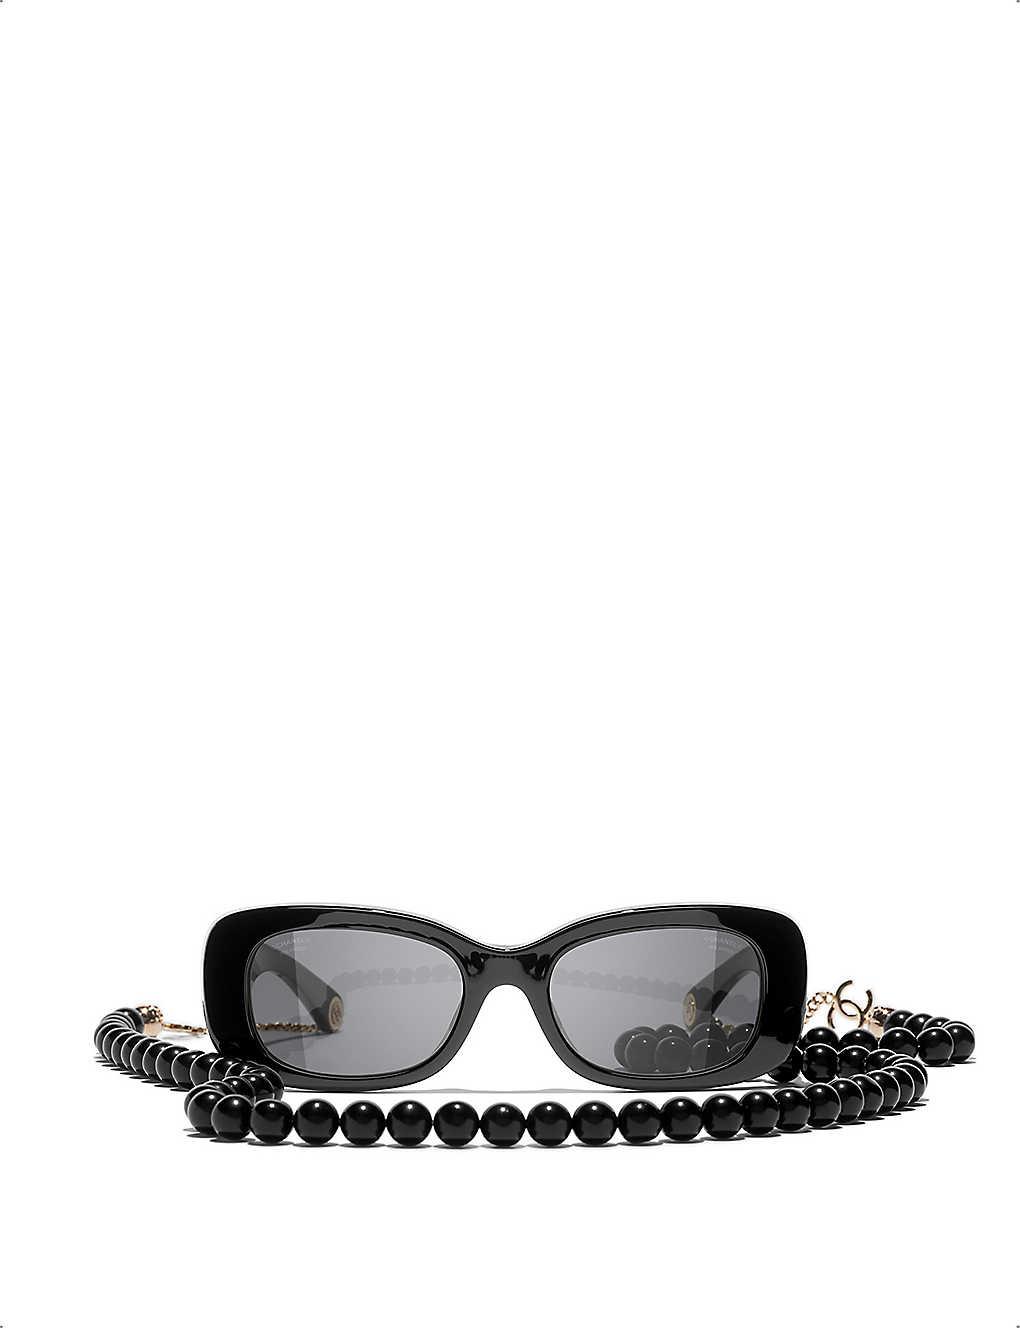 Chanel Rectangle Sunglasses in Grey